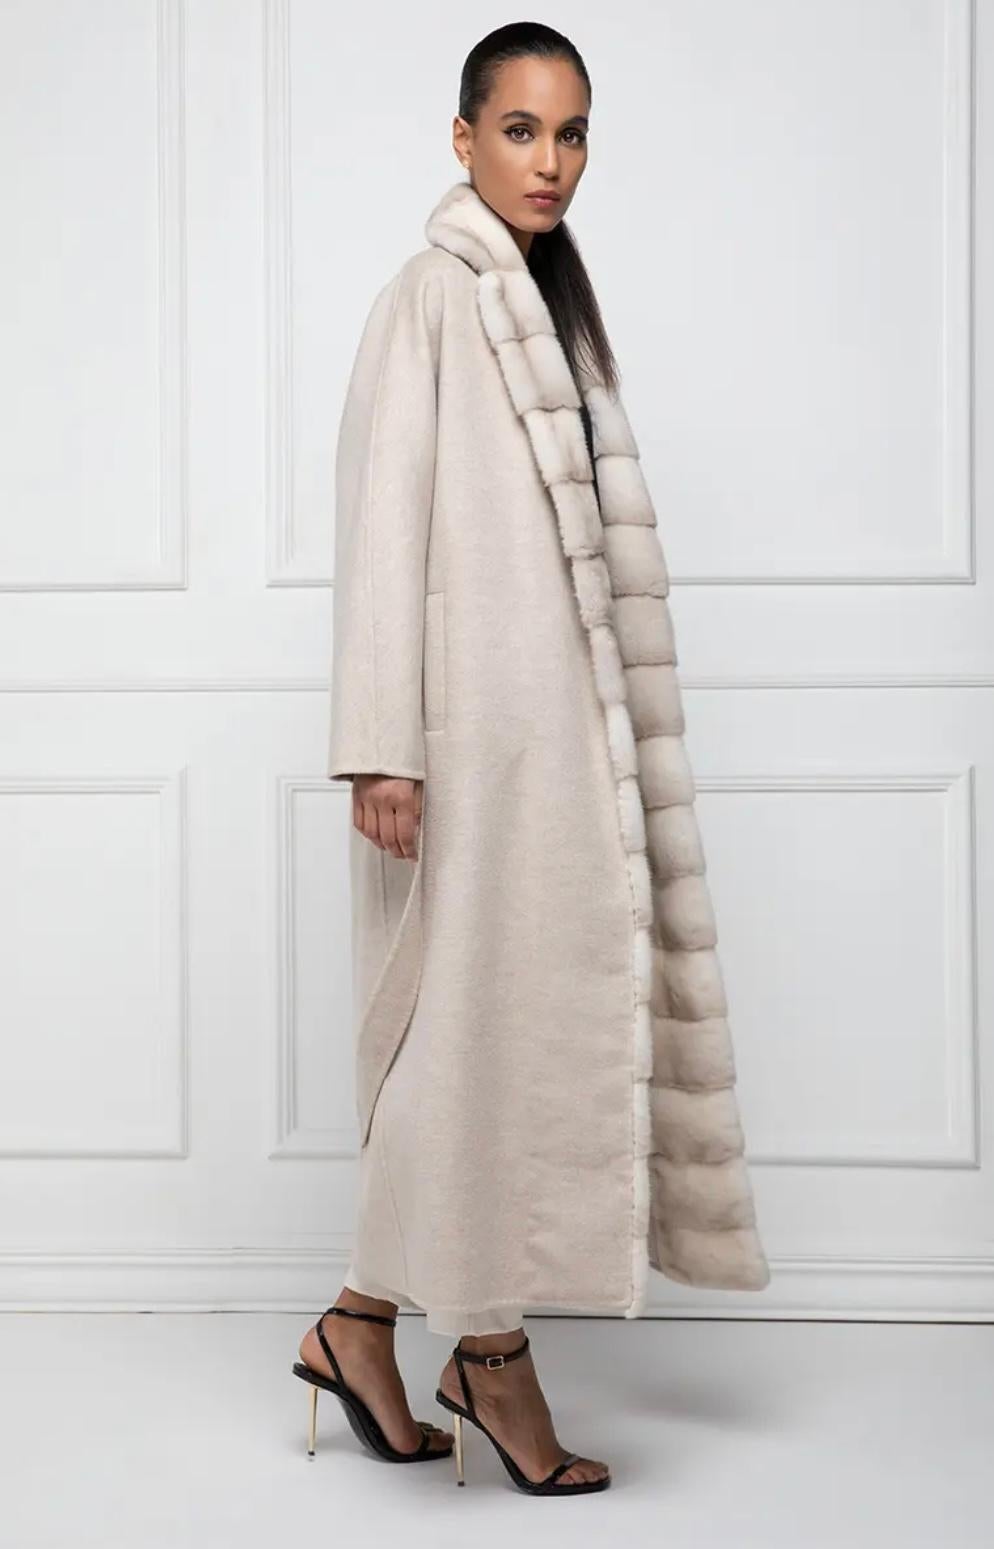 Cashmere Loro Piana with mink and whole skins. Also this Mink Fur, as the most part of the collection, is made using selected female mink carefully chosen by our laboratories. The type of mink fur used for this natural mink is Danish, precisely from